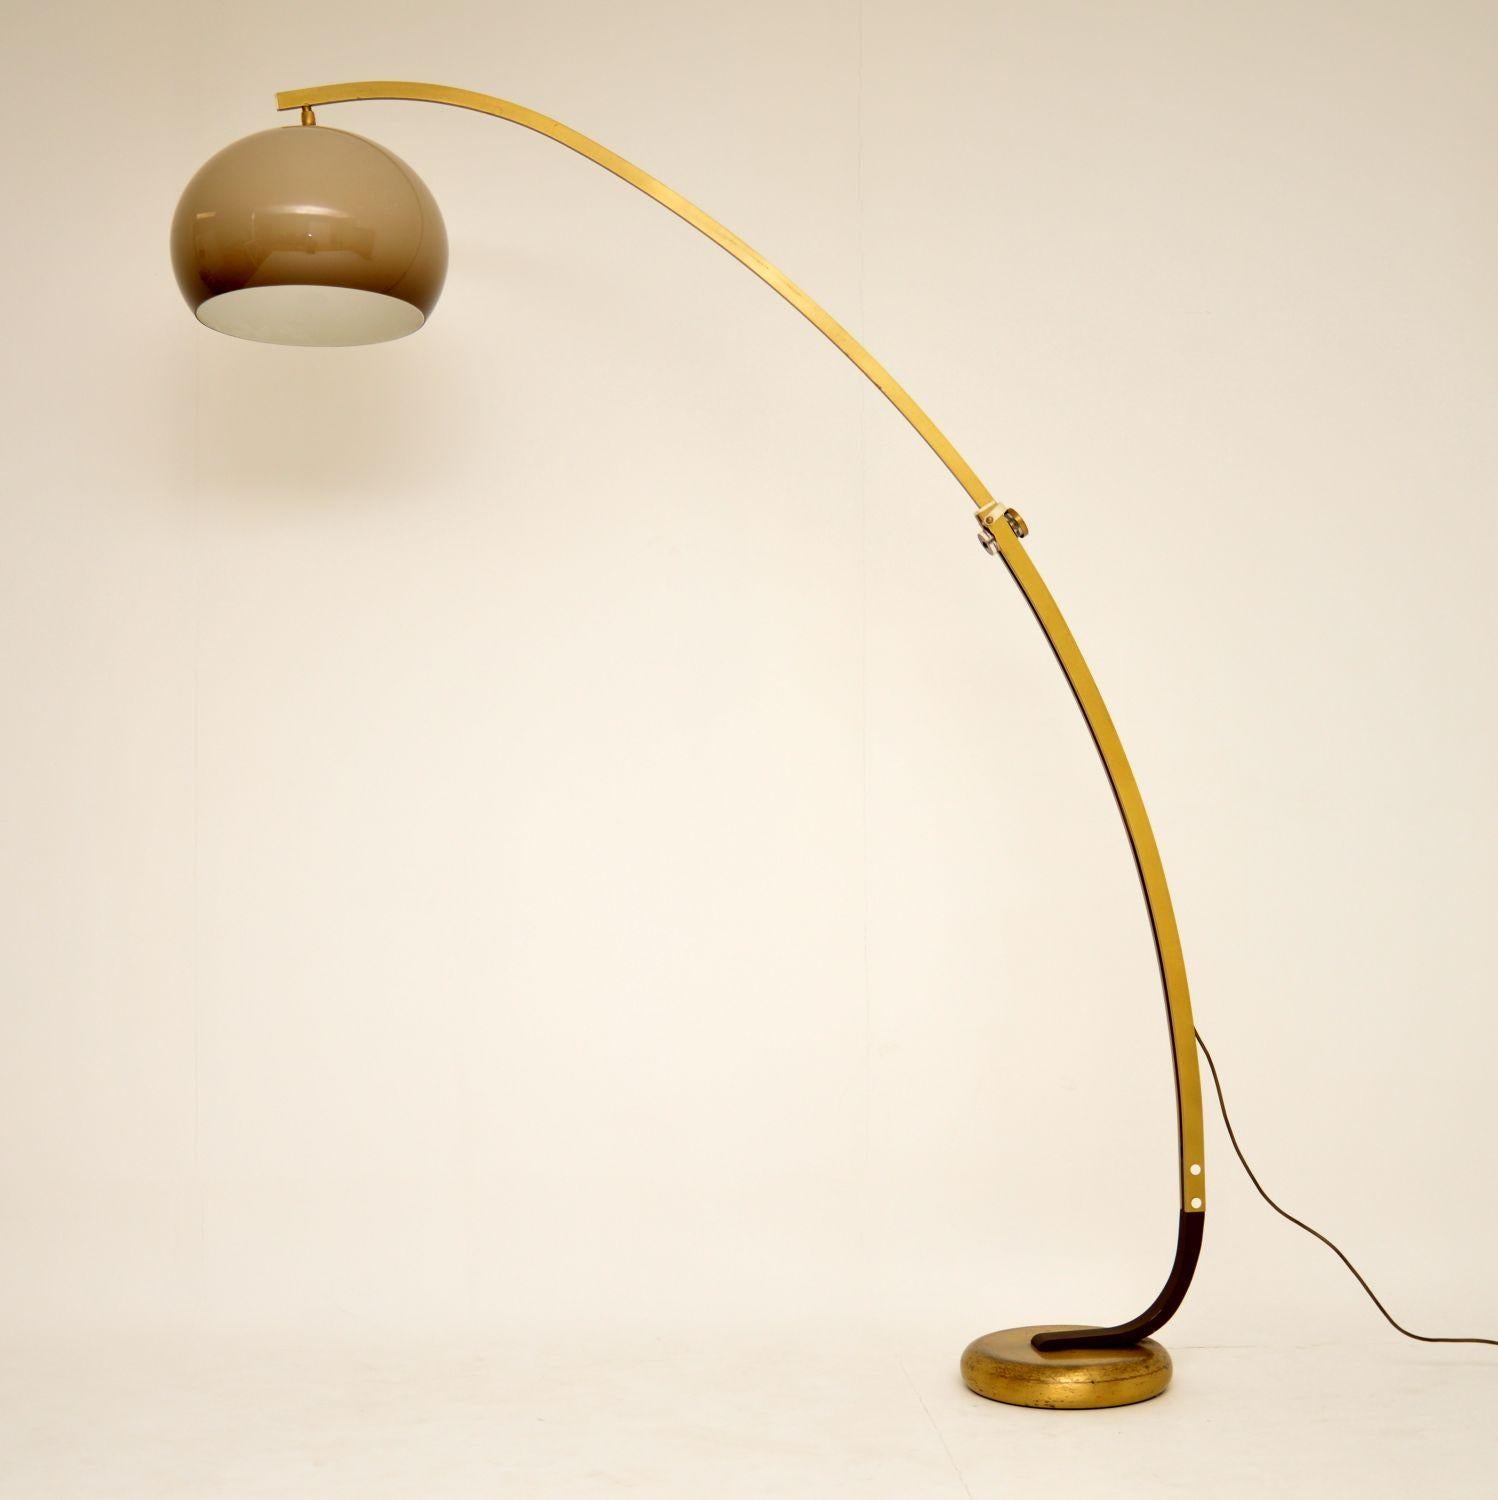 A very stylish vintage arc floor lamp, this was made in Italy and dates from the 1960s-1970s. It has an extendable arc mechanism, the height and length can be increased significantly. The shade can also swivel and tilt. This is in good vintage